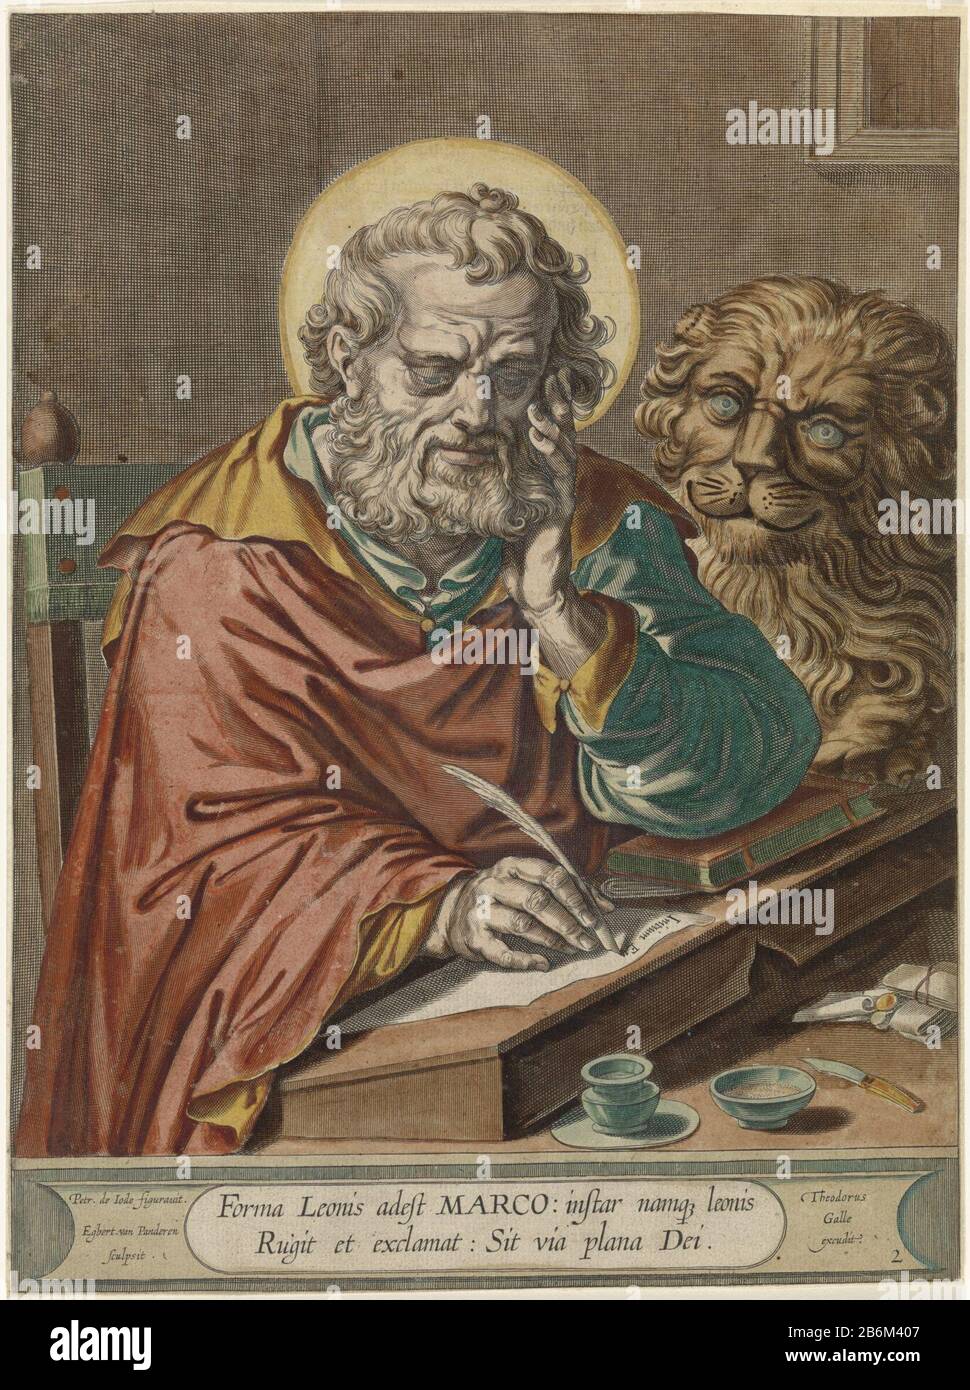 Evangelist Marcus Vier evangelisten (serietitel) The evangelist Mark,  writing at a table. In addition to him his attribute the lion. In a context  a two-line caption in Latin. Second picture from a